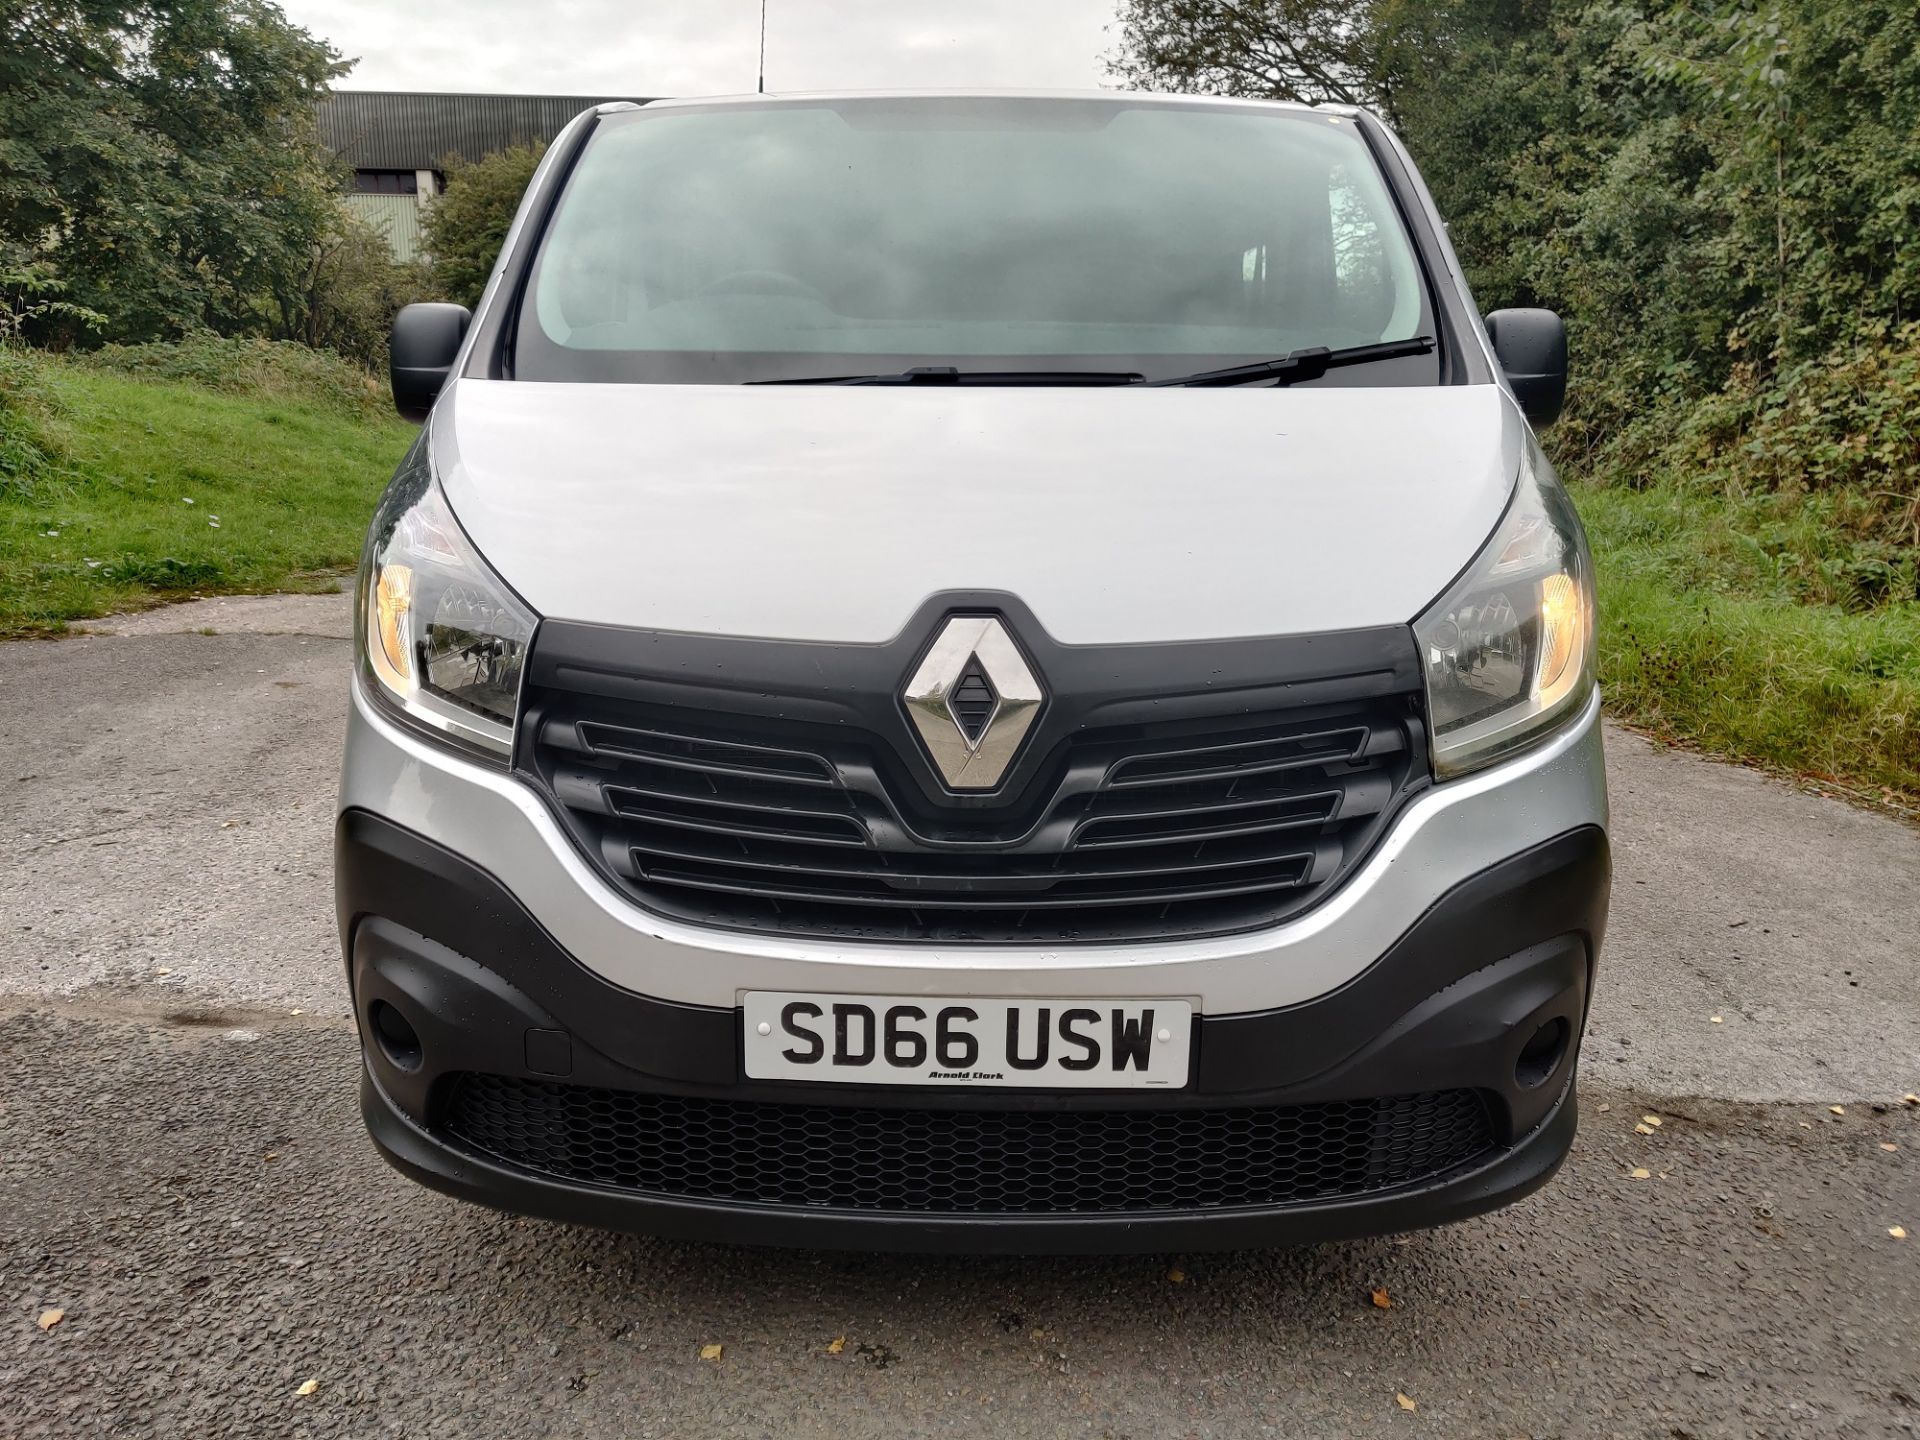 2016/66 REG RENAULT TRAFIC SL27 BUSINESS DCI 1.6 DIESEL SILVER MPV - 7 SEATER *NO VAT* - Image 2 of 16